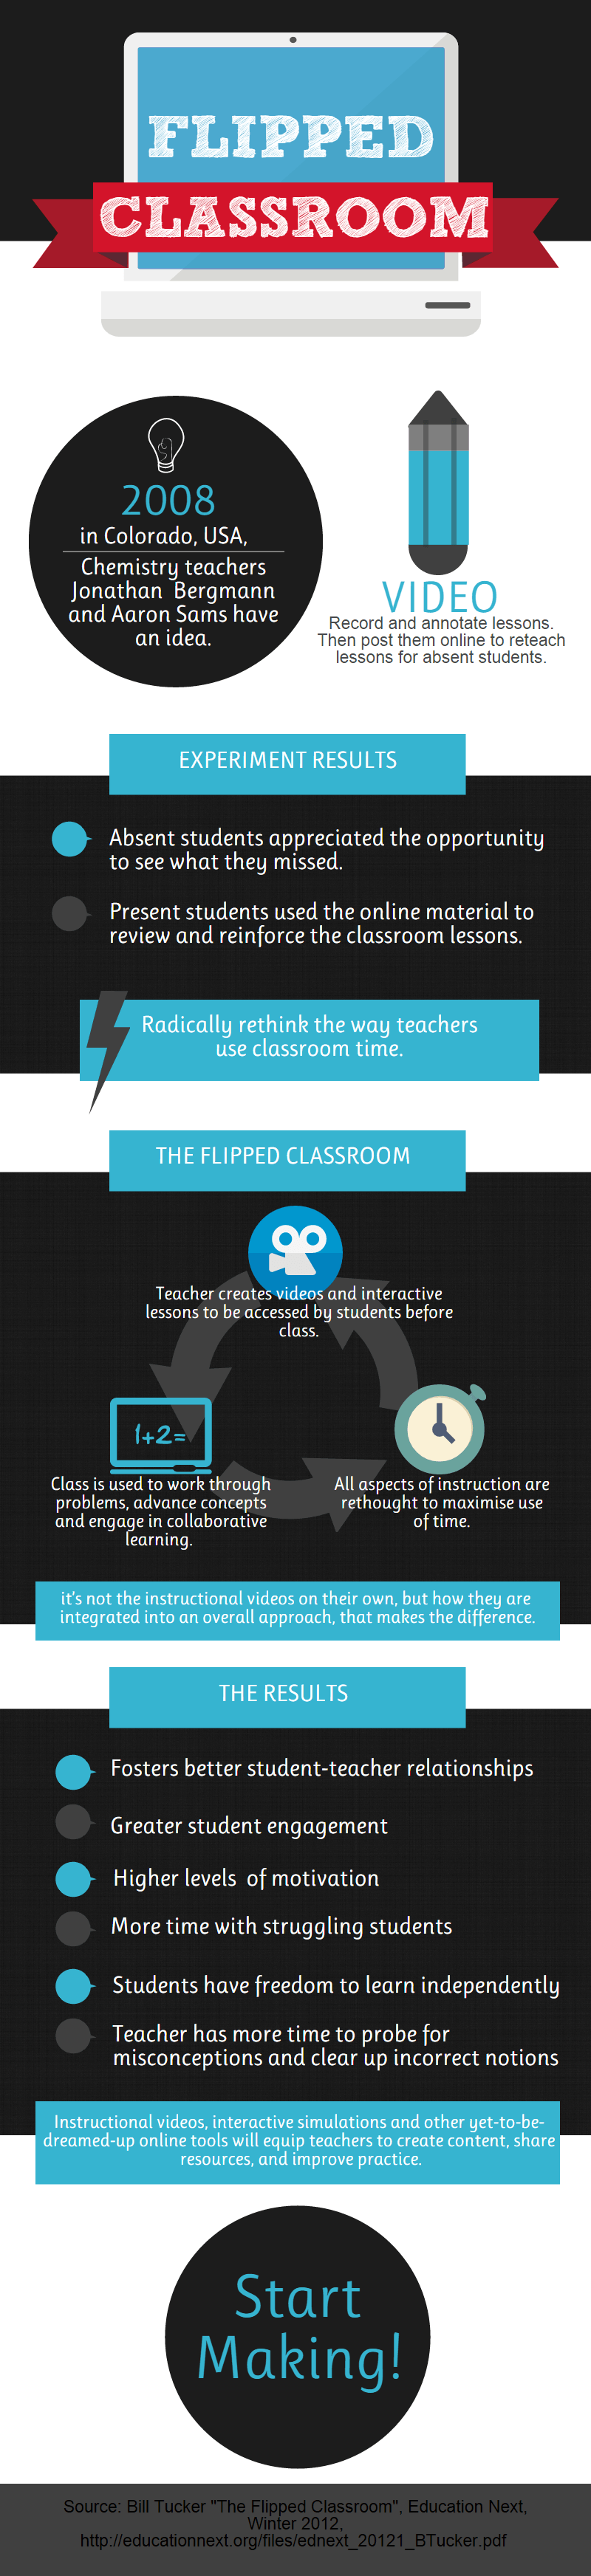 How a Flipped Classroom Works Infographic